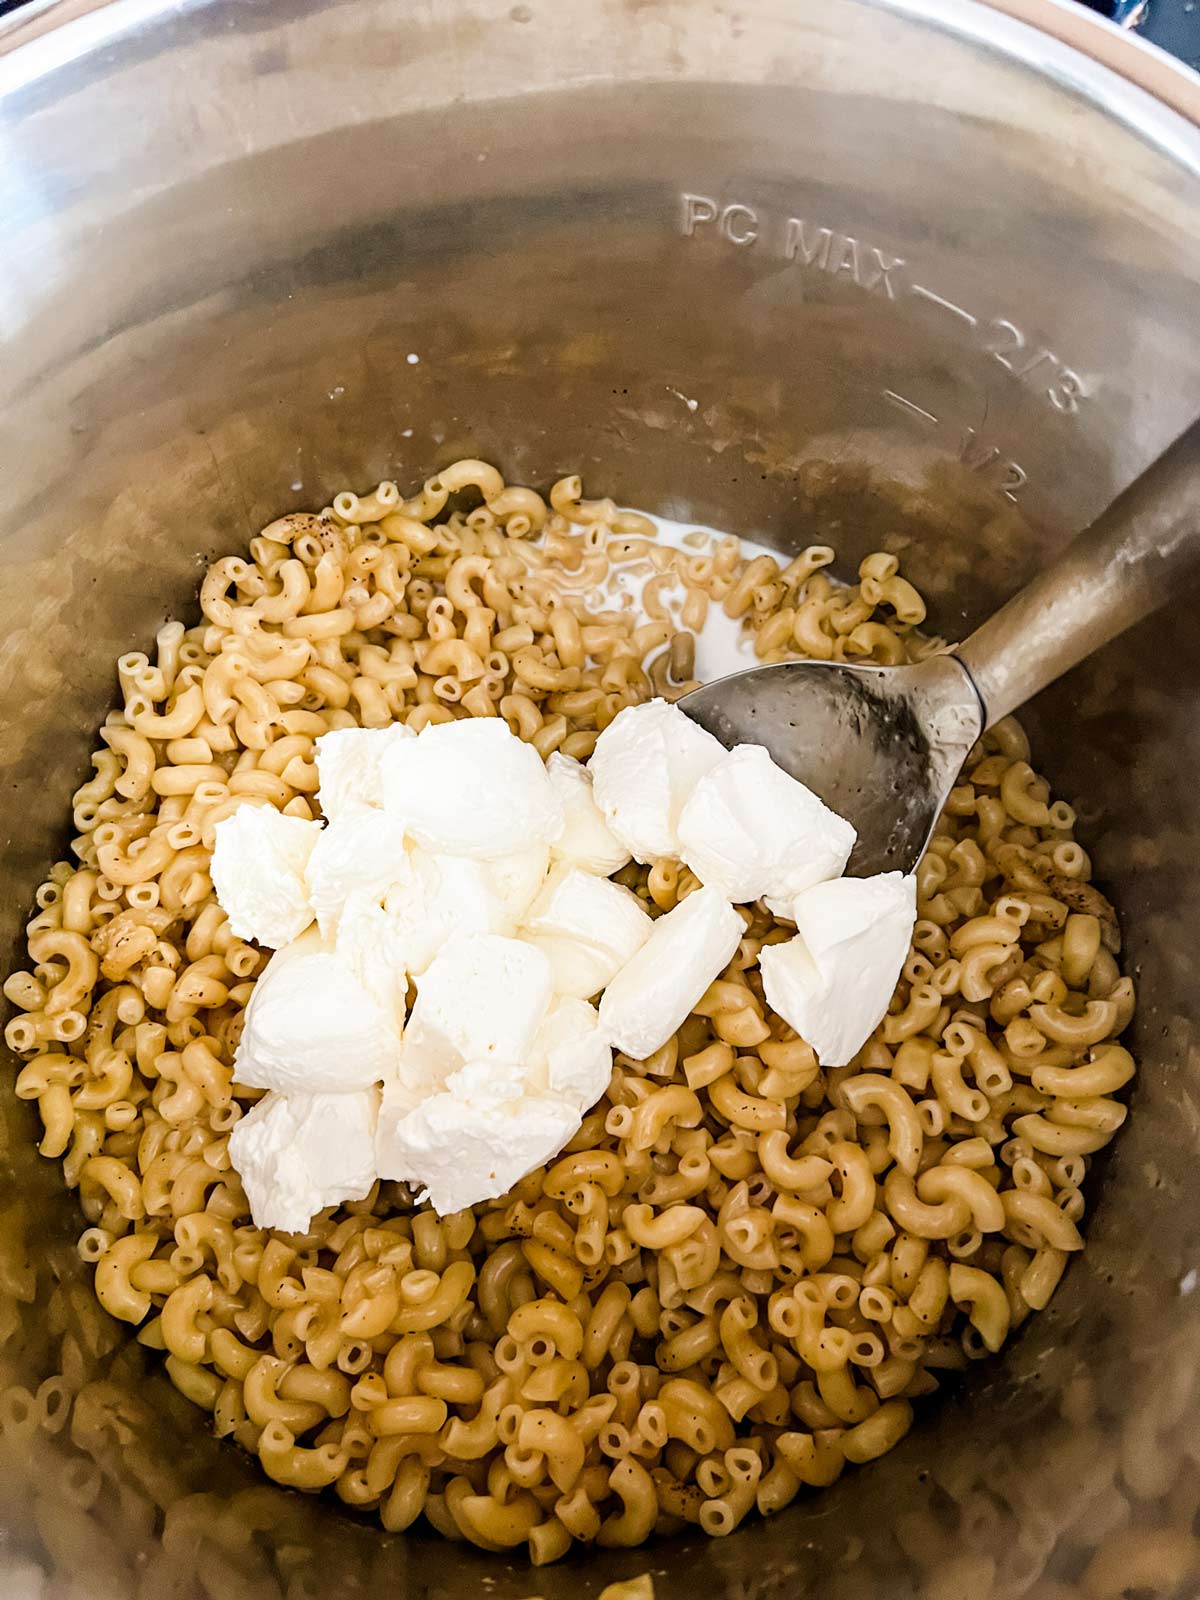 Cream cheese added to the top of cooked noodles and milk in an Instant Pot.